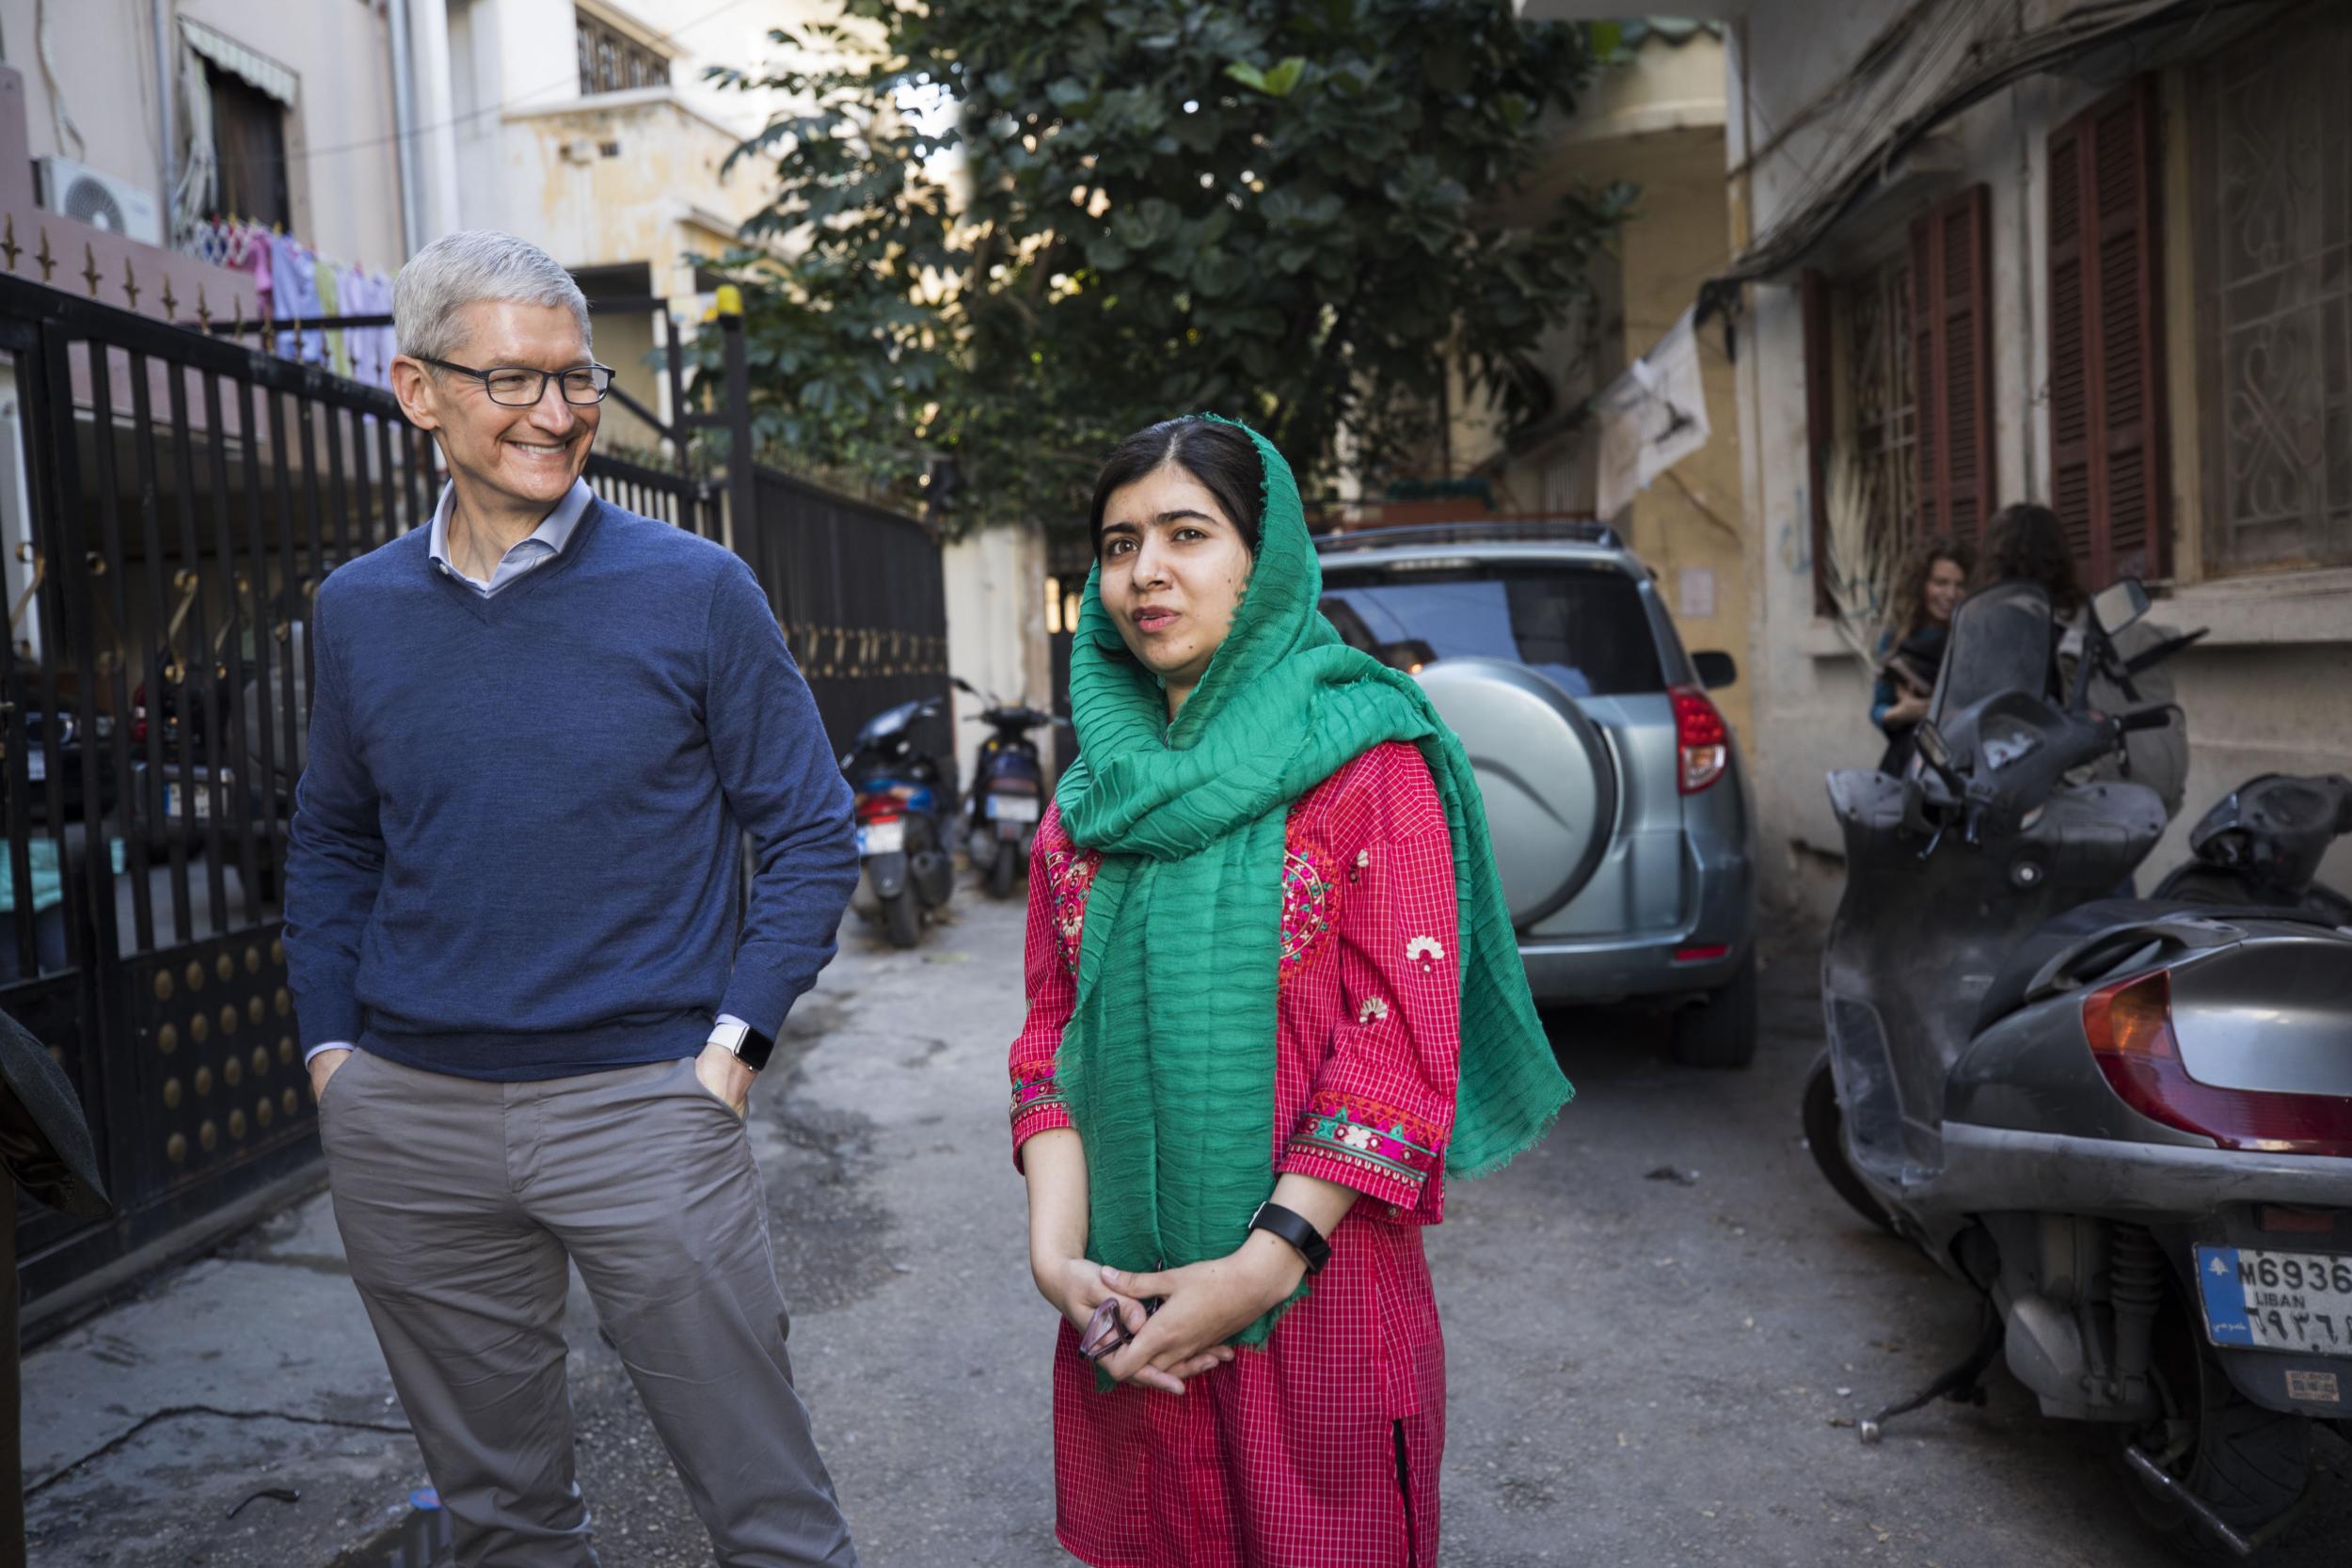 The pair met at Oxford, where Malala is studying; four months later, the partnership between Apple and the Malala Fund has been formalised